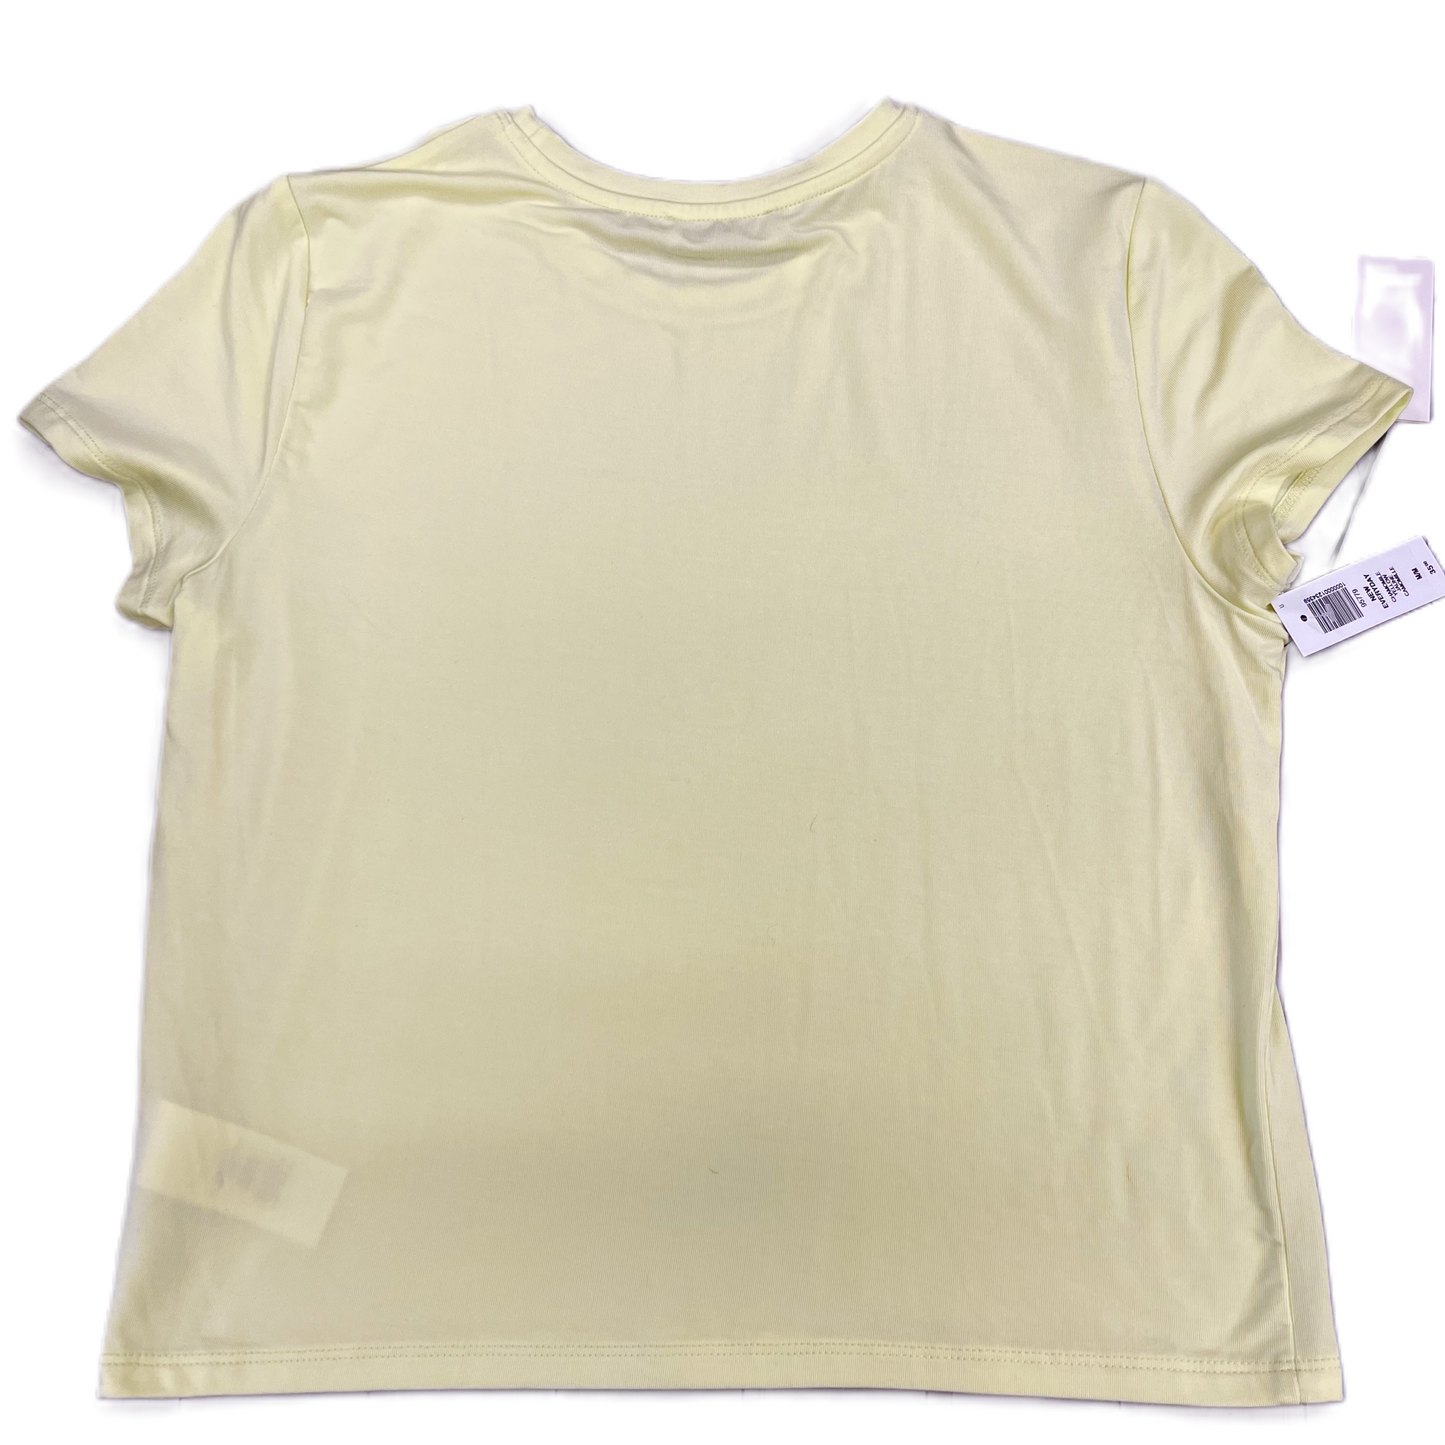 Yellow Top Short Sleeve By Babaton, Size: M